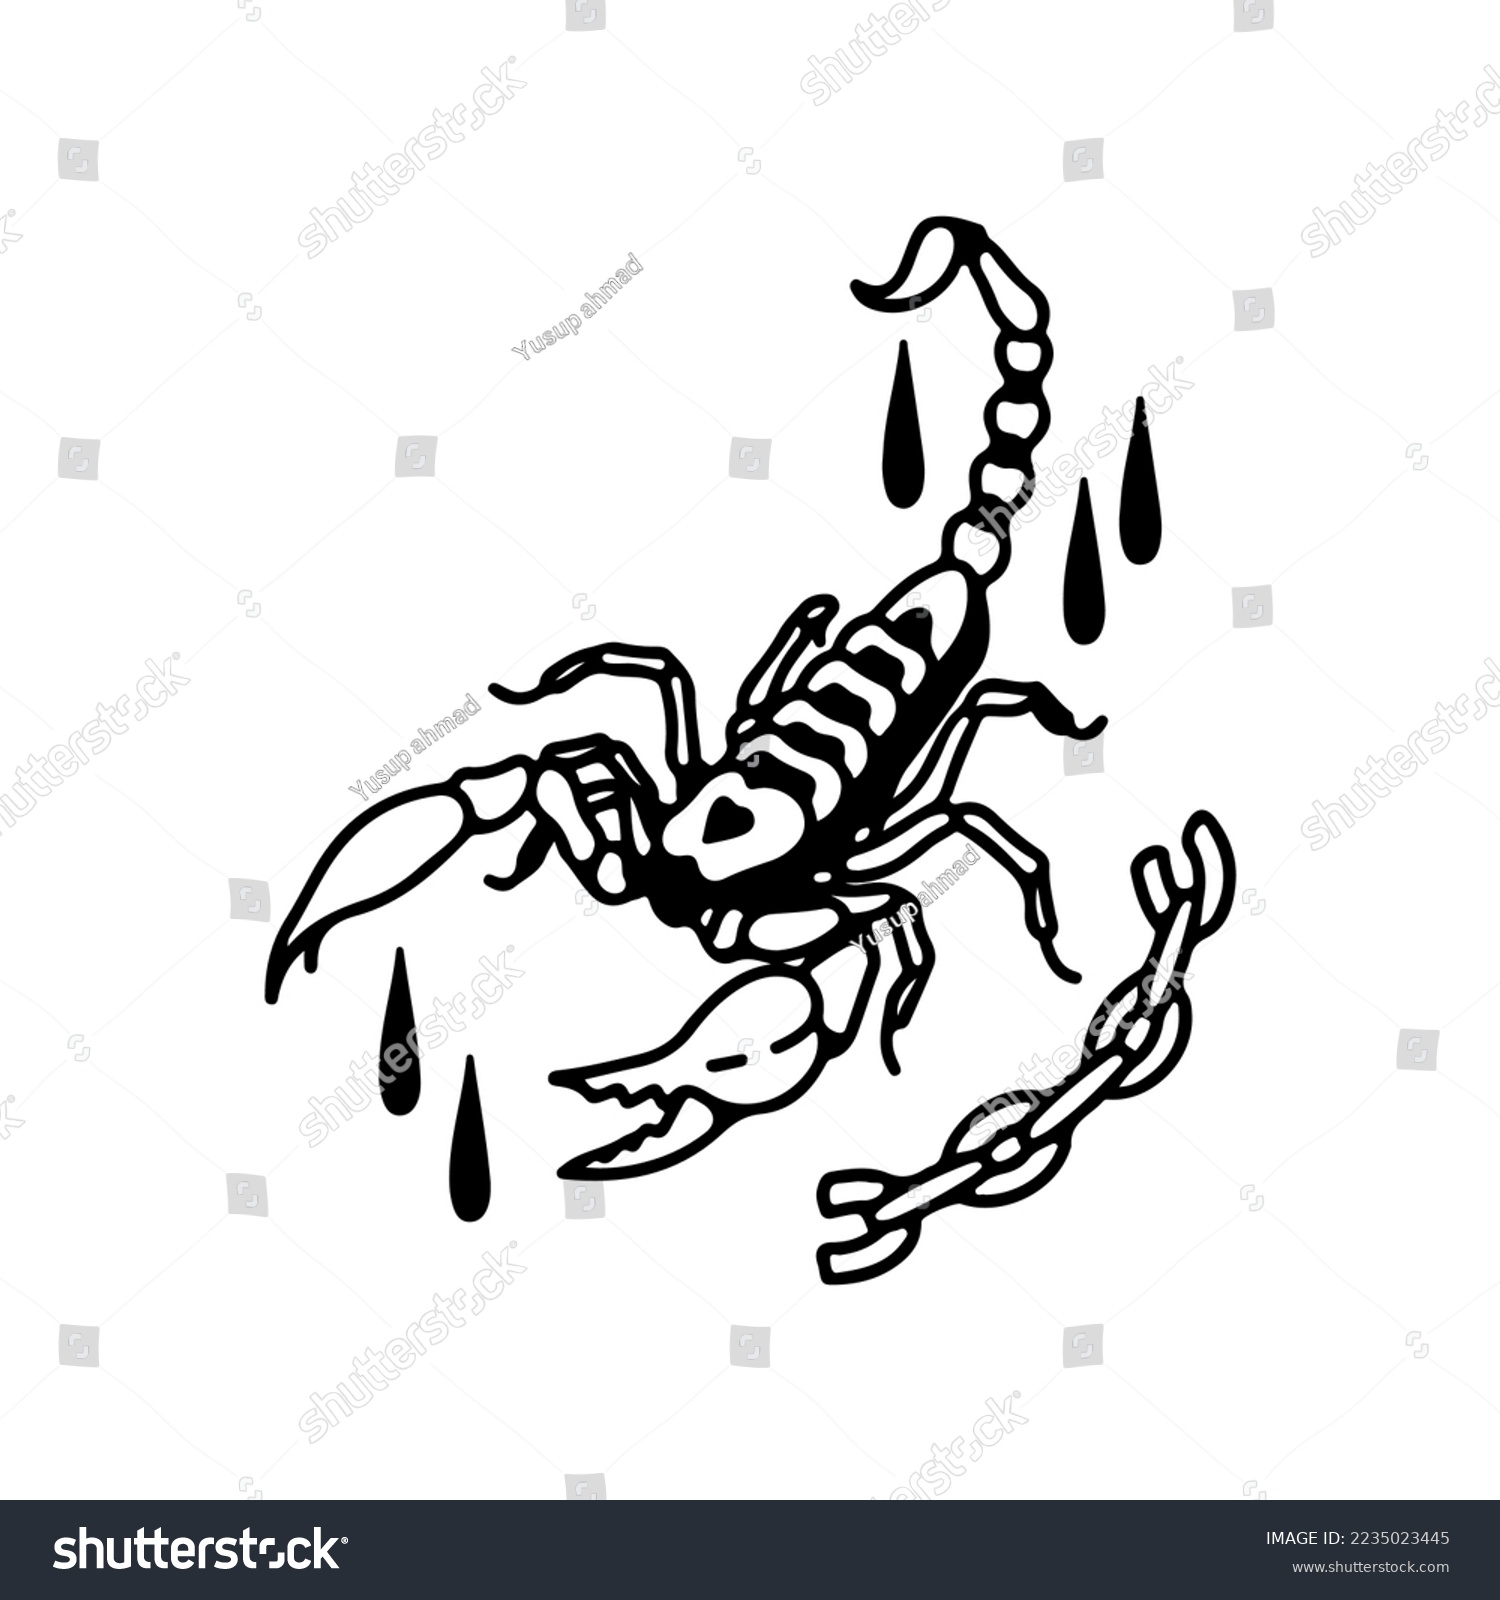 SVG of scorpion and chain vector illustration svg